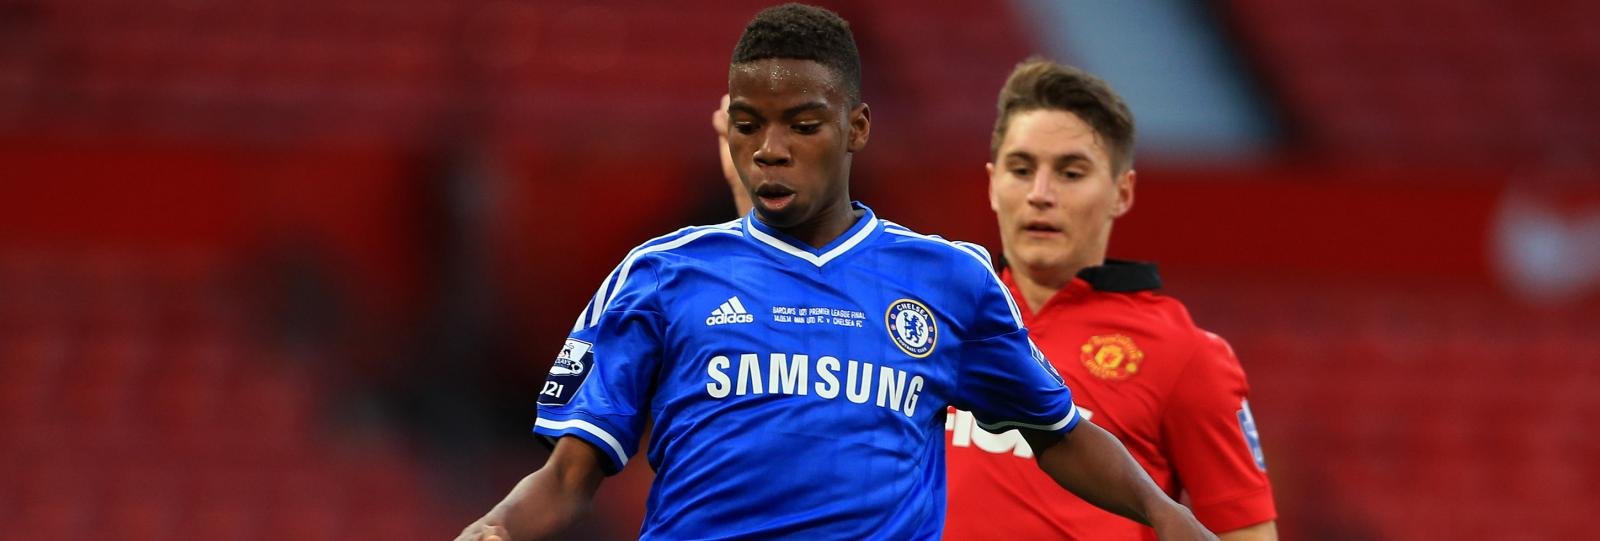 Watch: Chelsea starlet’s birthday treat with Manchester United legend